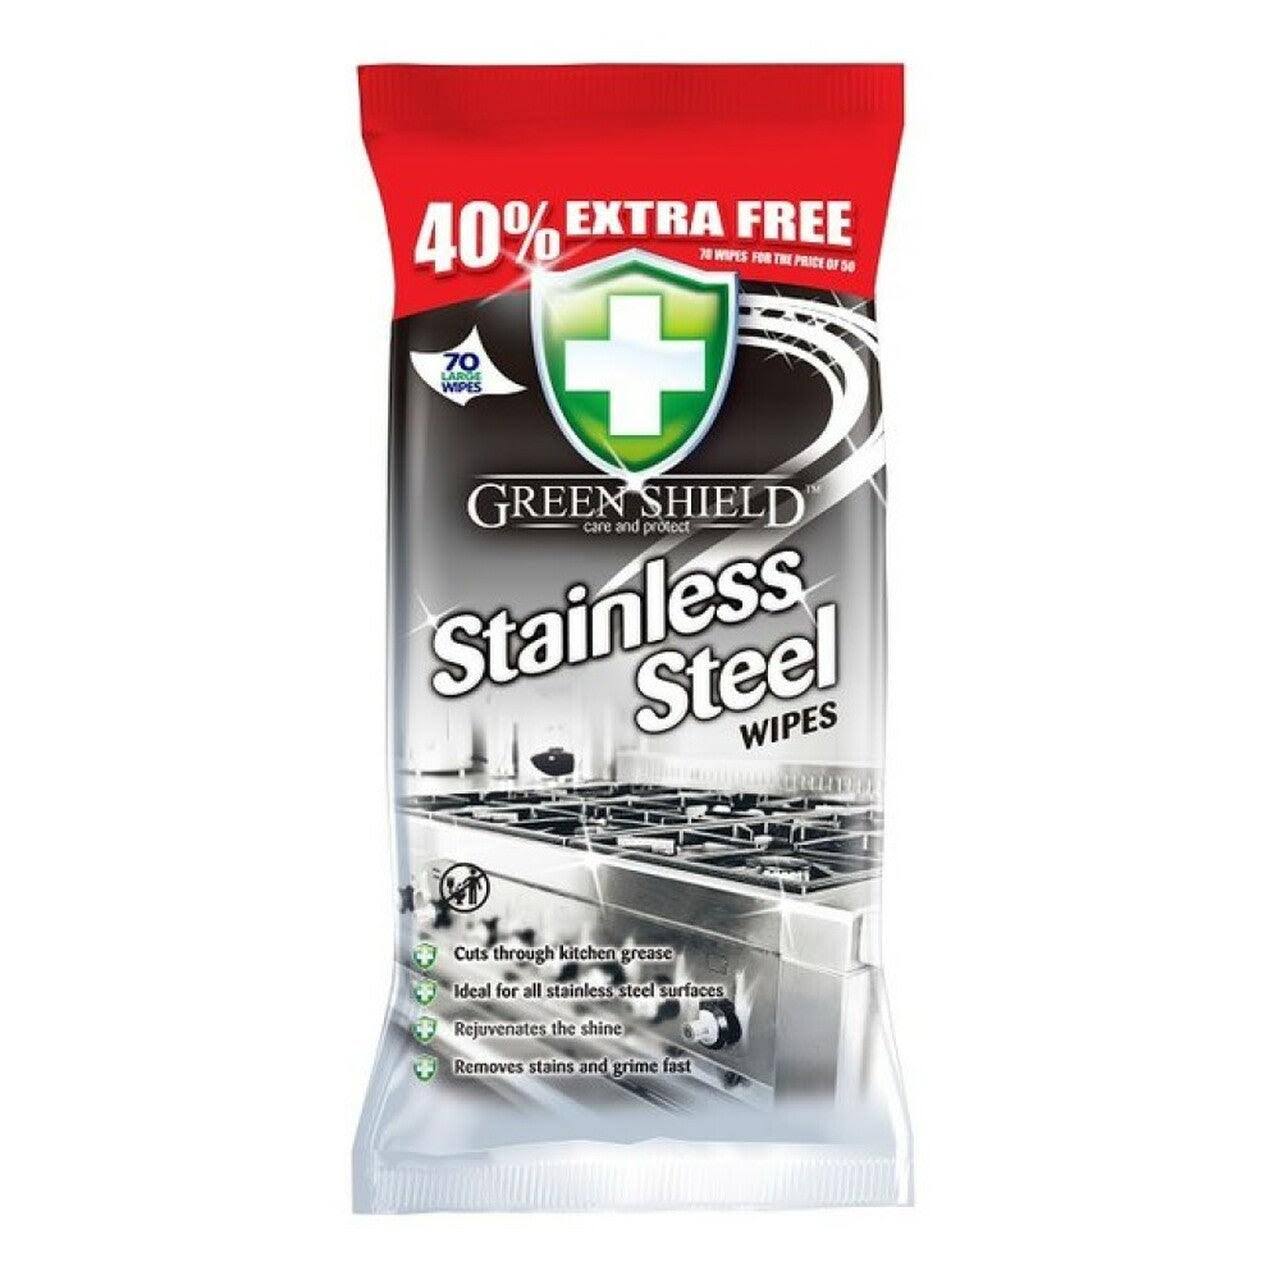 Green Shield Stainless Steel Wipes - 70 PCS